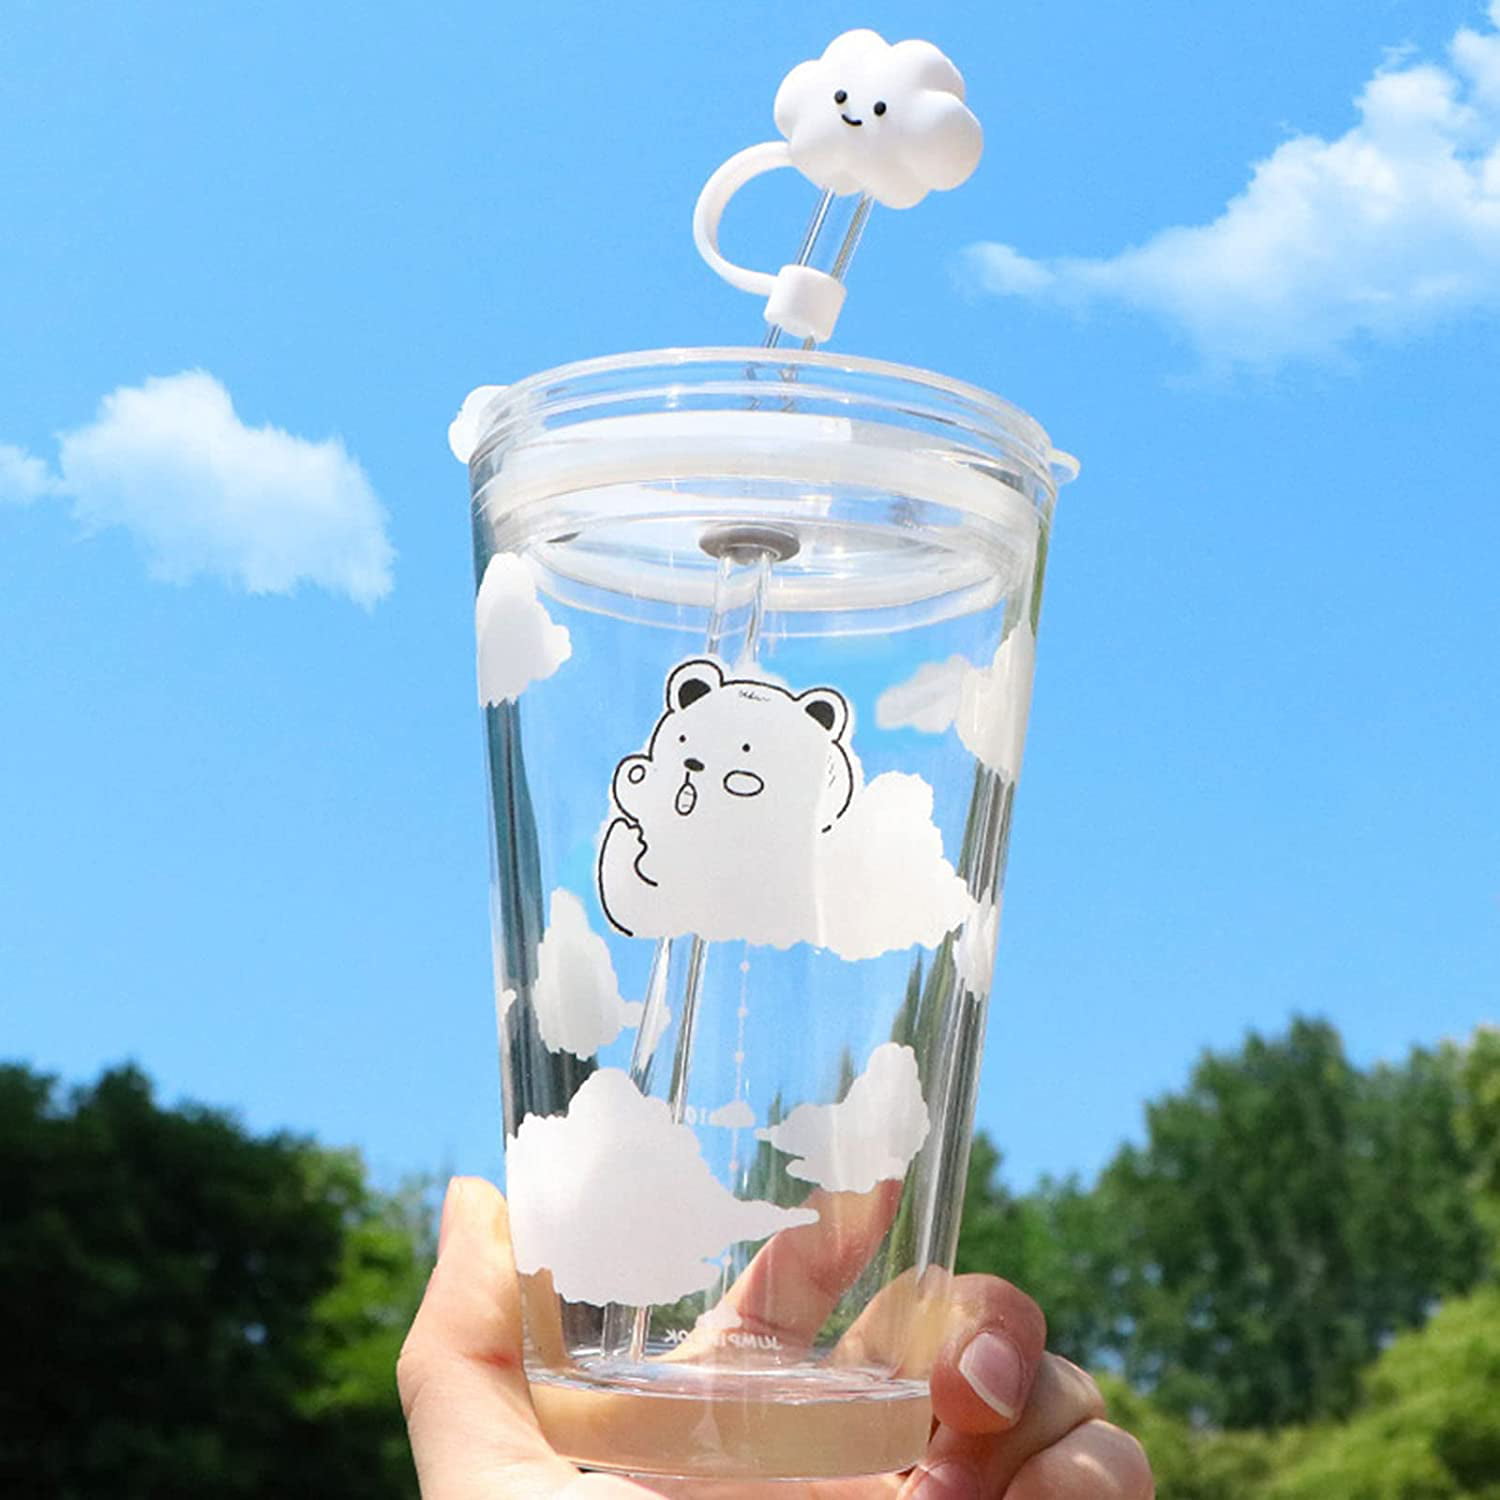  10pcs Straw Covers for Reusable Straws, Cloud Duck Bear Shaped  Straw Caps Covers Cute Silicone Straw Tips Cover Dust-Proof Straw Covers Cap  Straw Toppers for Sippy Cups with 6-8mm Diameter Straws 